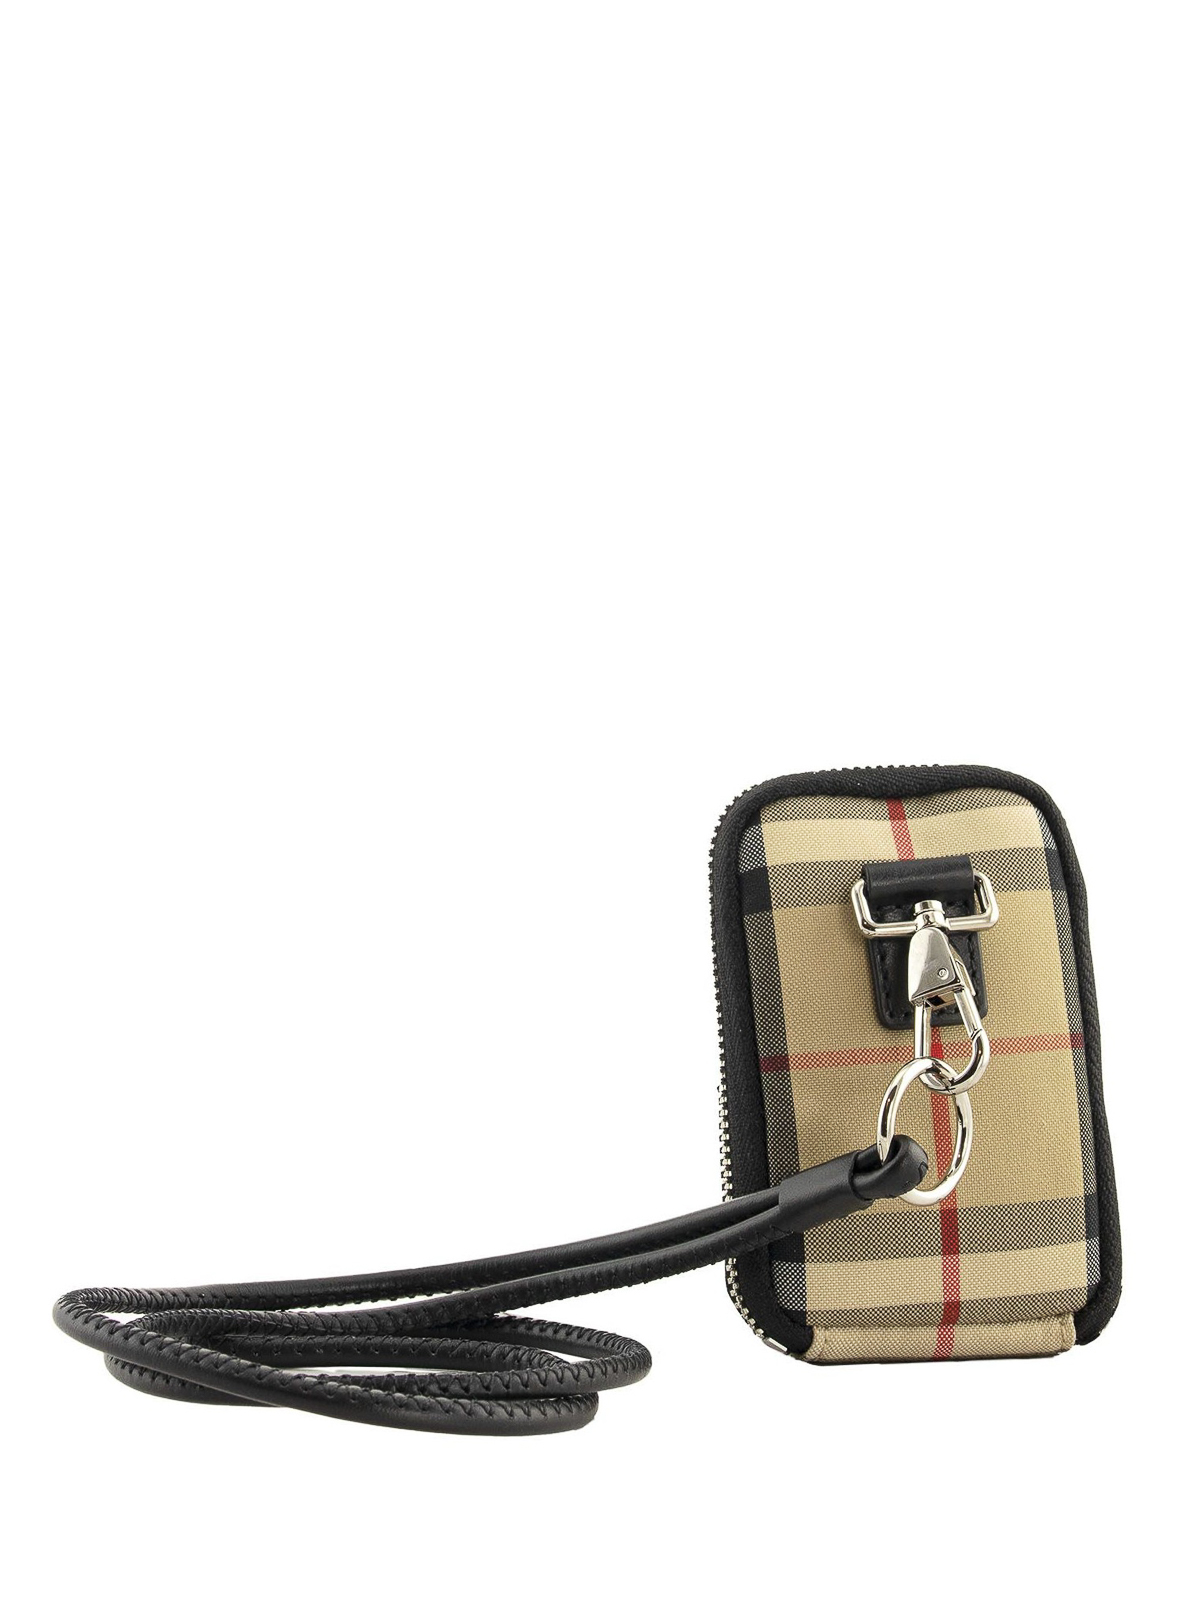 Burberry Card case with lanyard, Men's Accessories